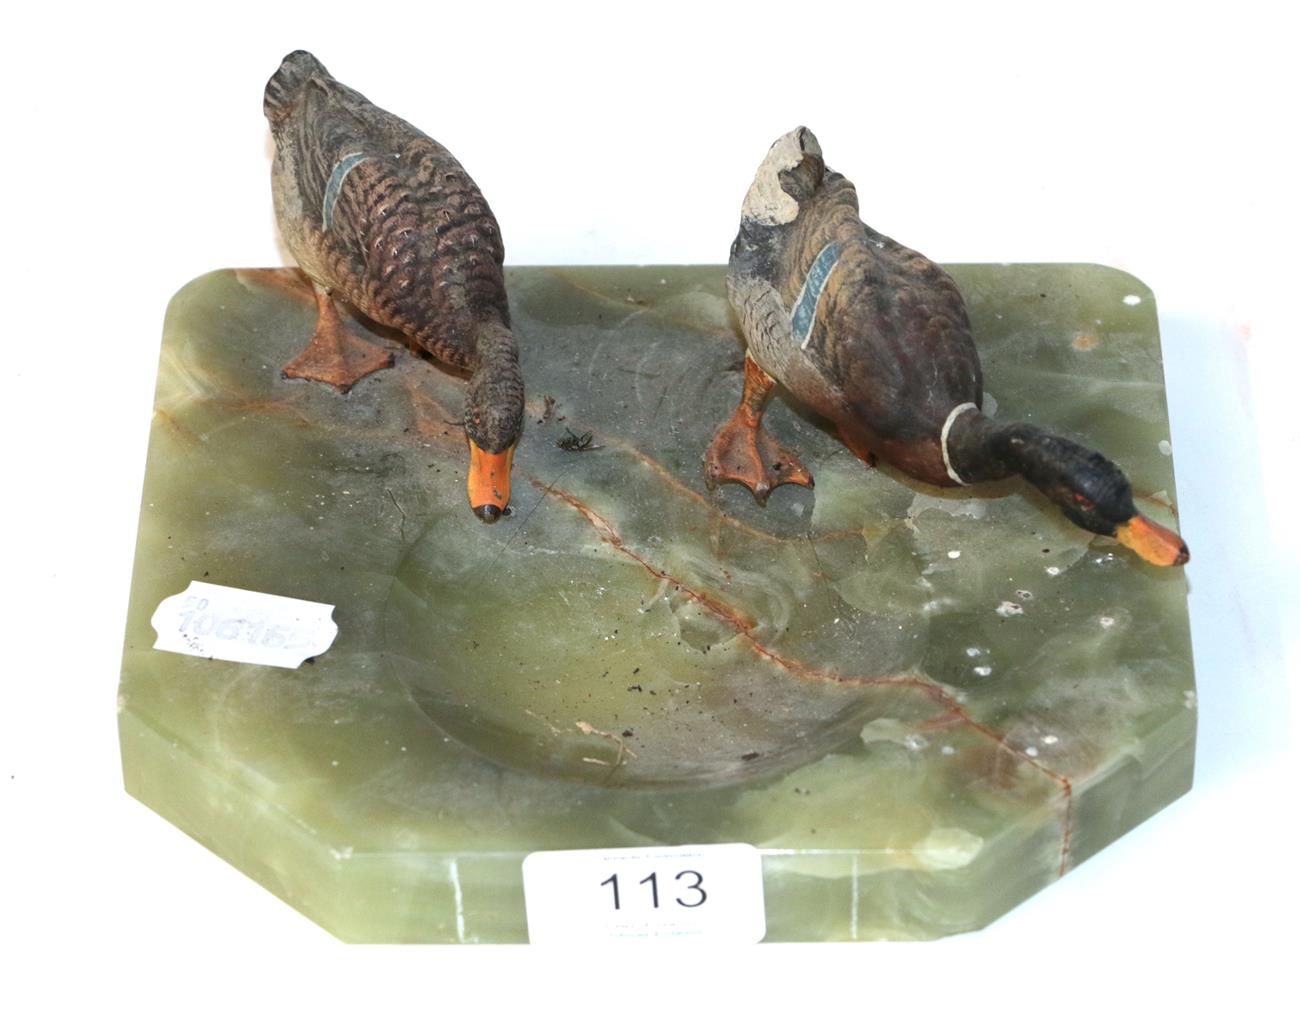 Lot 113 - Cold painted bronze models of two ducks, mounted on an onyx base